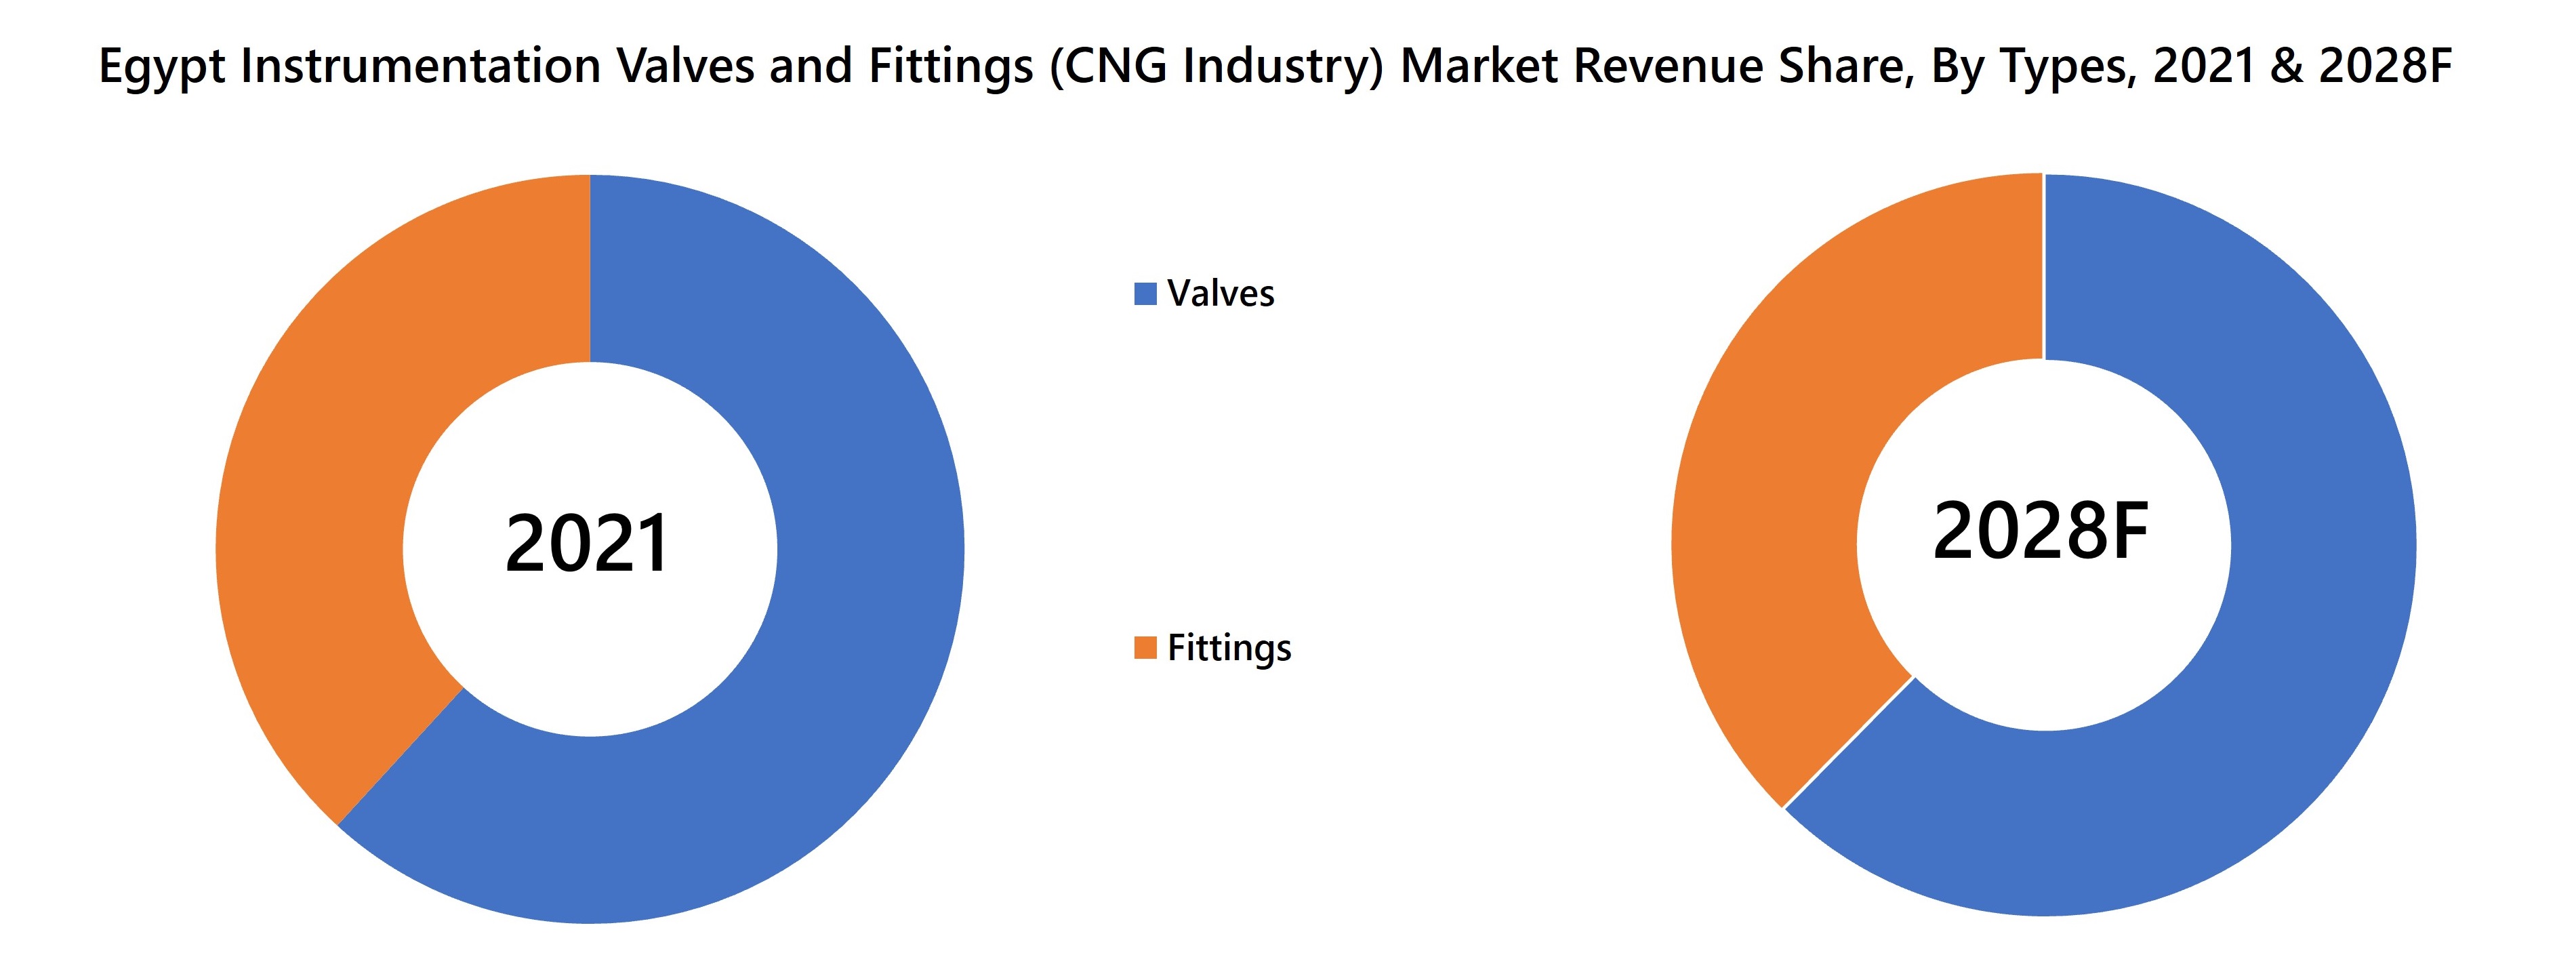 Egypt Instrumentation Valves and Fittings (CNG Industry) Market Revenue Share